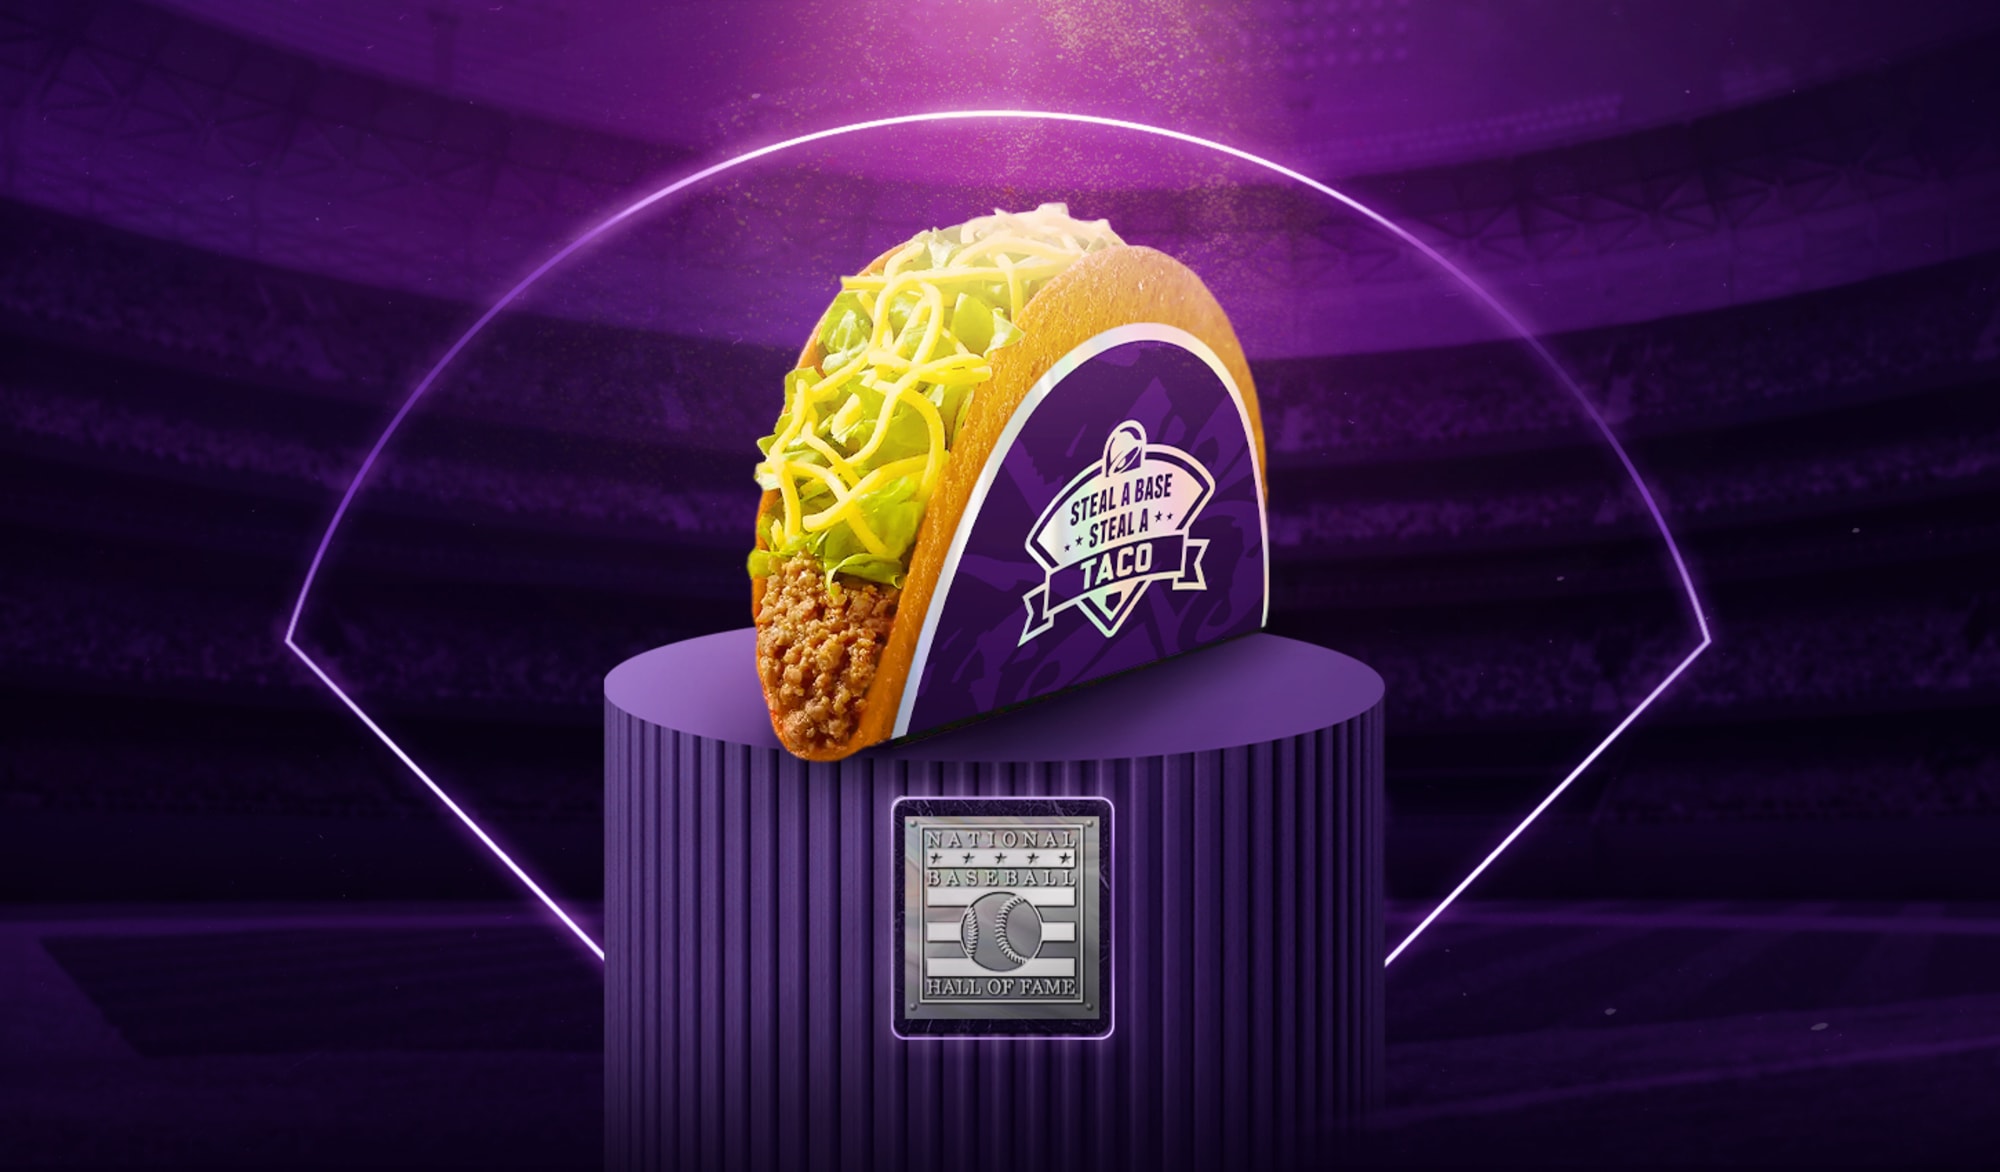 Taco Bell cements its place in baseball history with its free taco